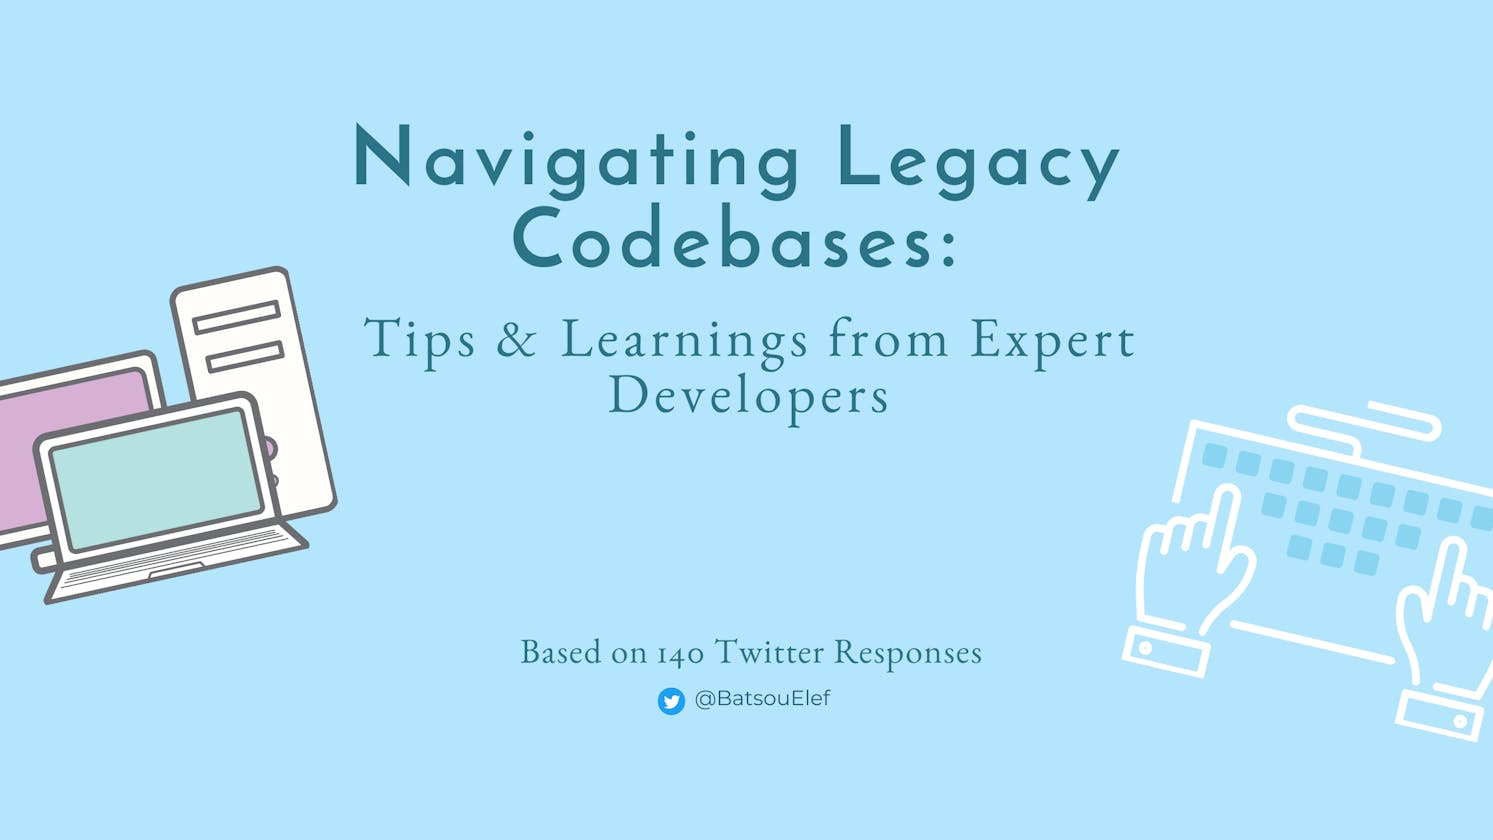 Navigating Legacy Codebases: Tips & Learnings from Expert Developers